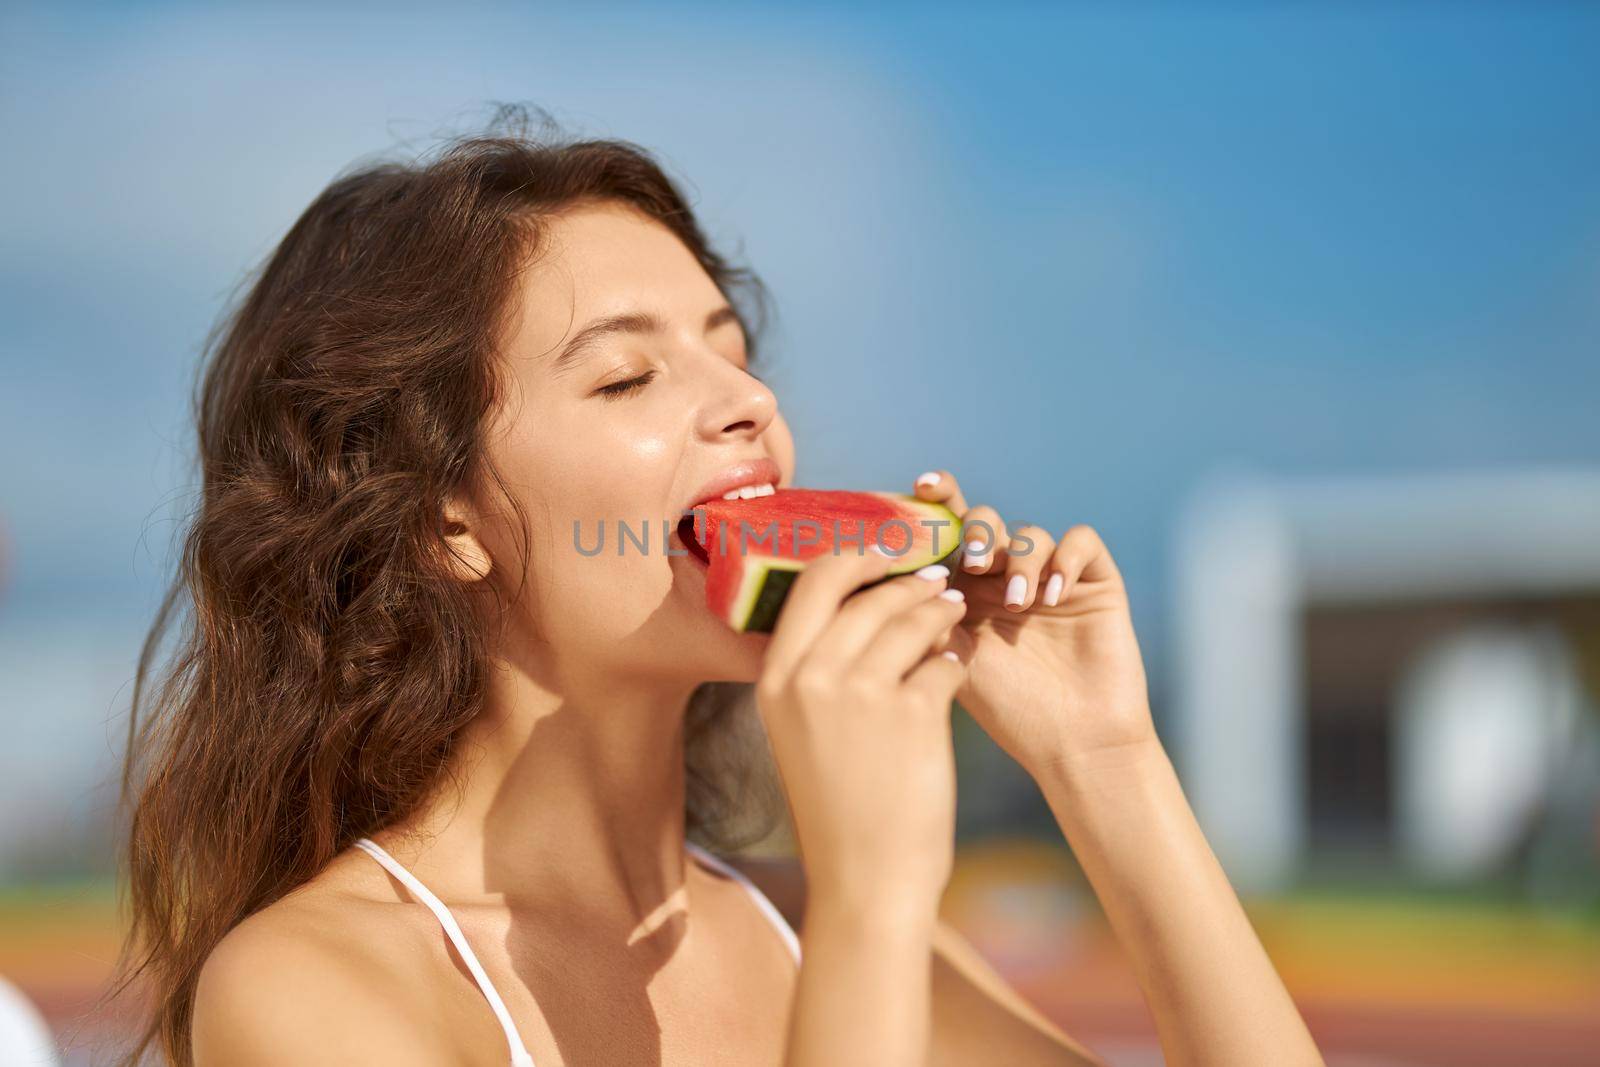 Charming brunette woman closing eyes in pleasure, while biting watermelon. by SerhiiBobyk